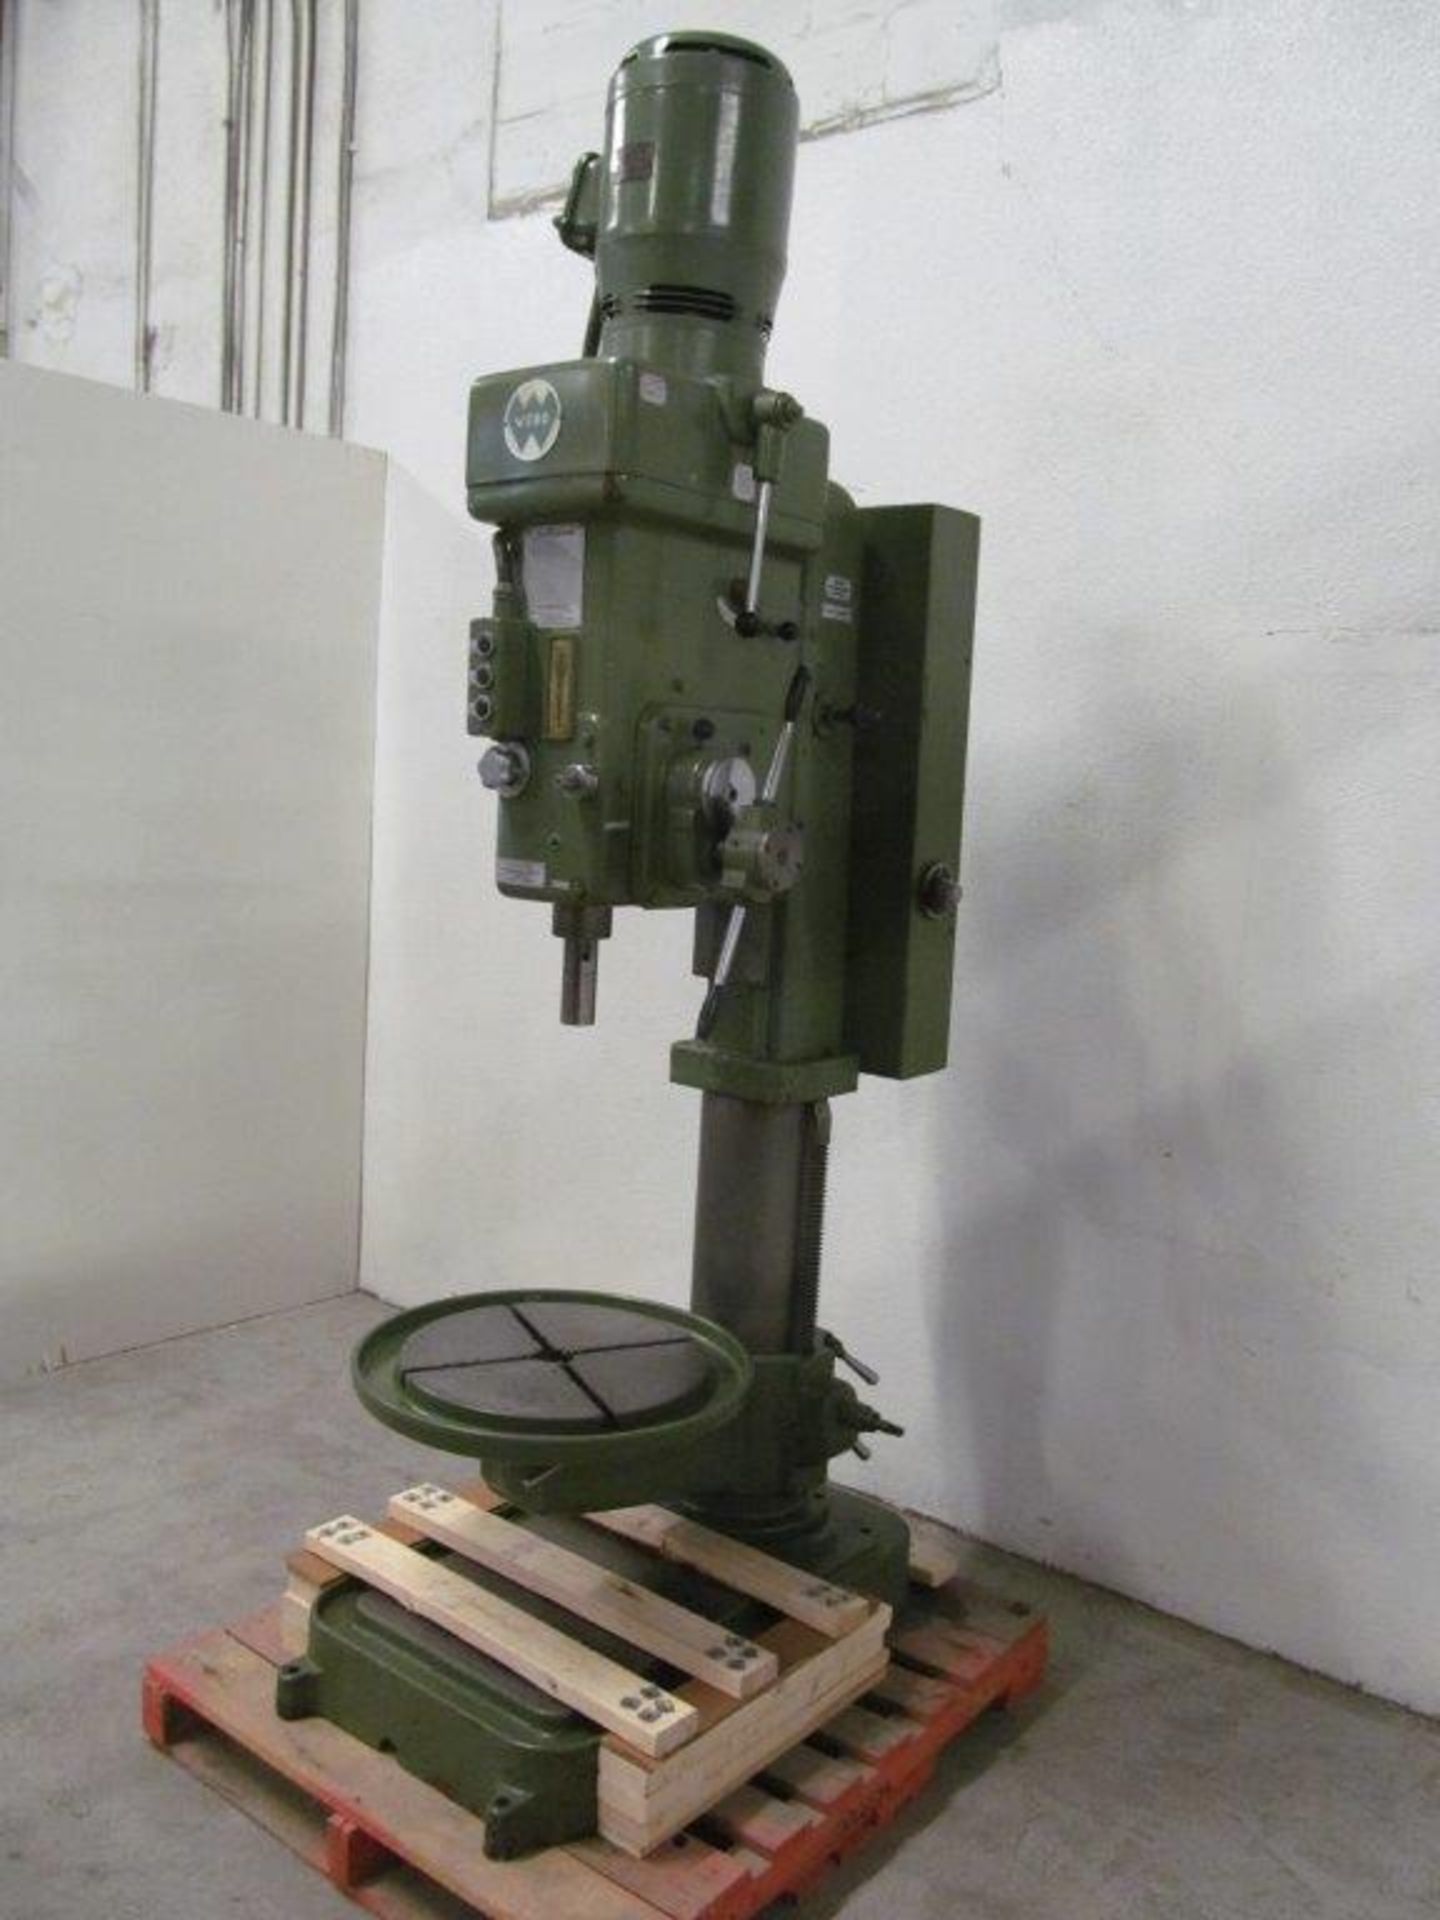 WEBO (GERMANY) HEAVY DUTY GEARED HEAD DRILL PRESS MT4 SPINDLE 1 9/16'' DRILLING CAPACITY, ELECTRICS: - Image 4 of 9